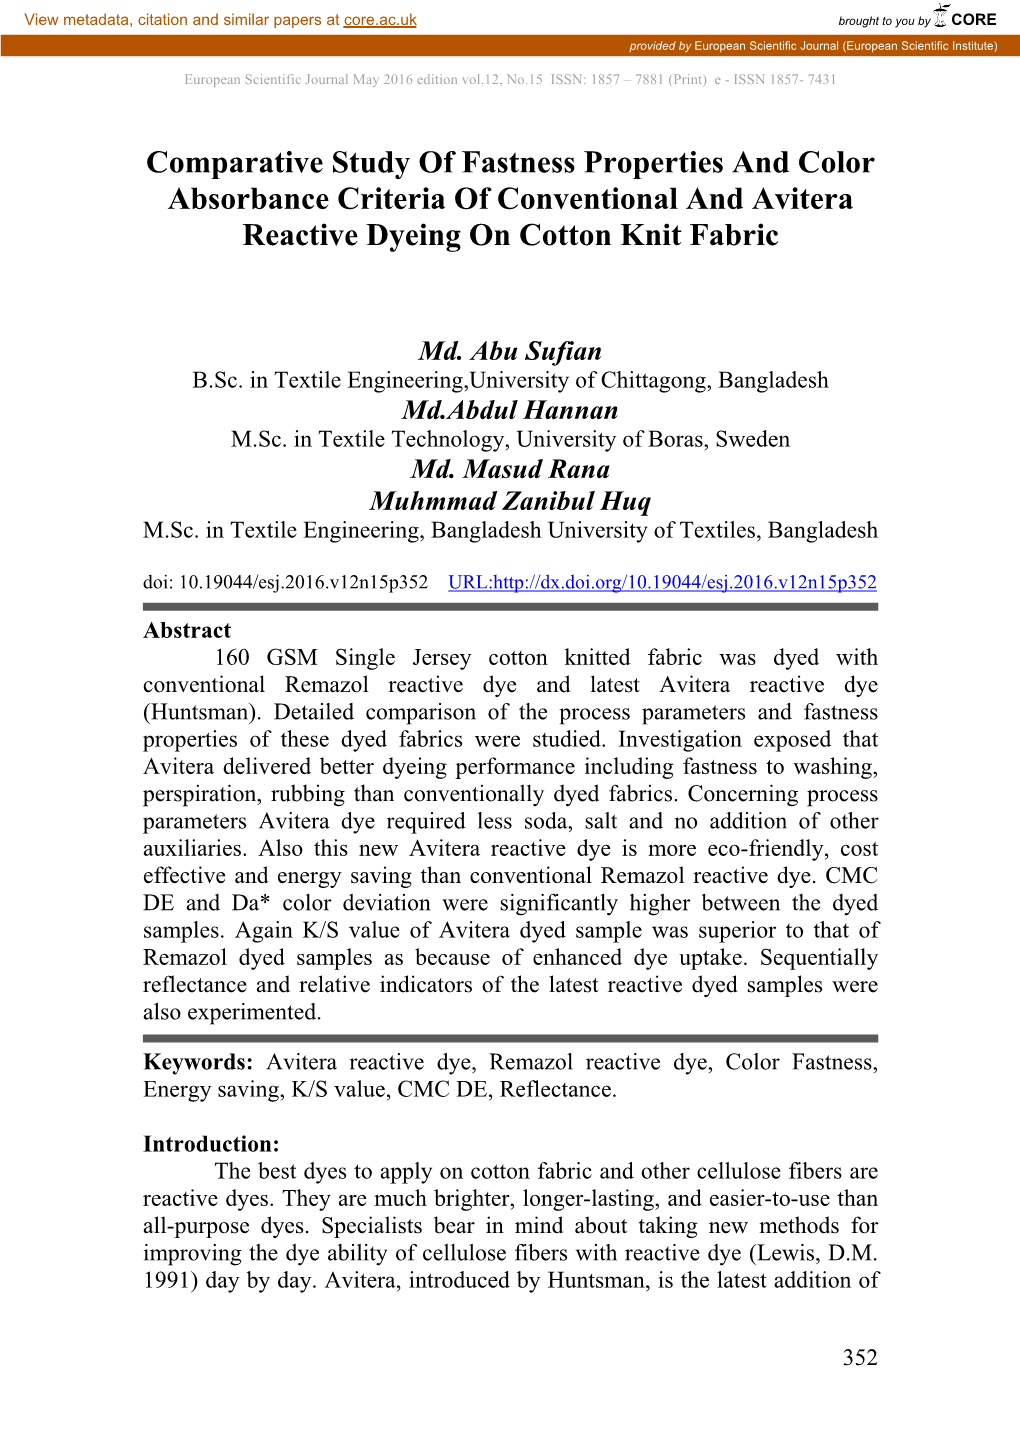 Comparative Study of Fastness Properties and Color Absorbance Criteria of Conventional and Avitera Reactive Dyeing on Cotton Knit Fabric